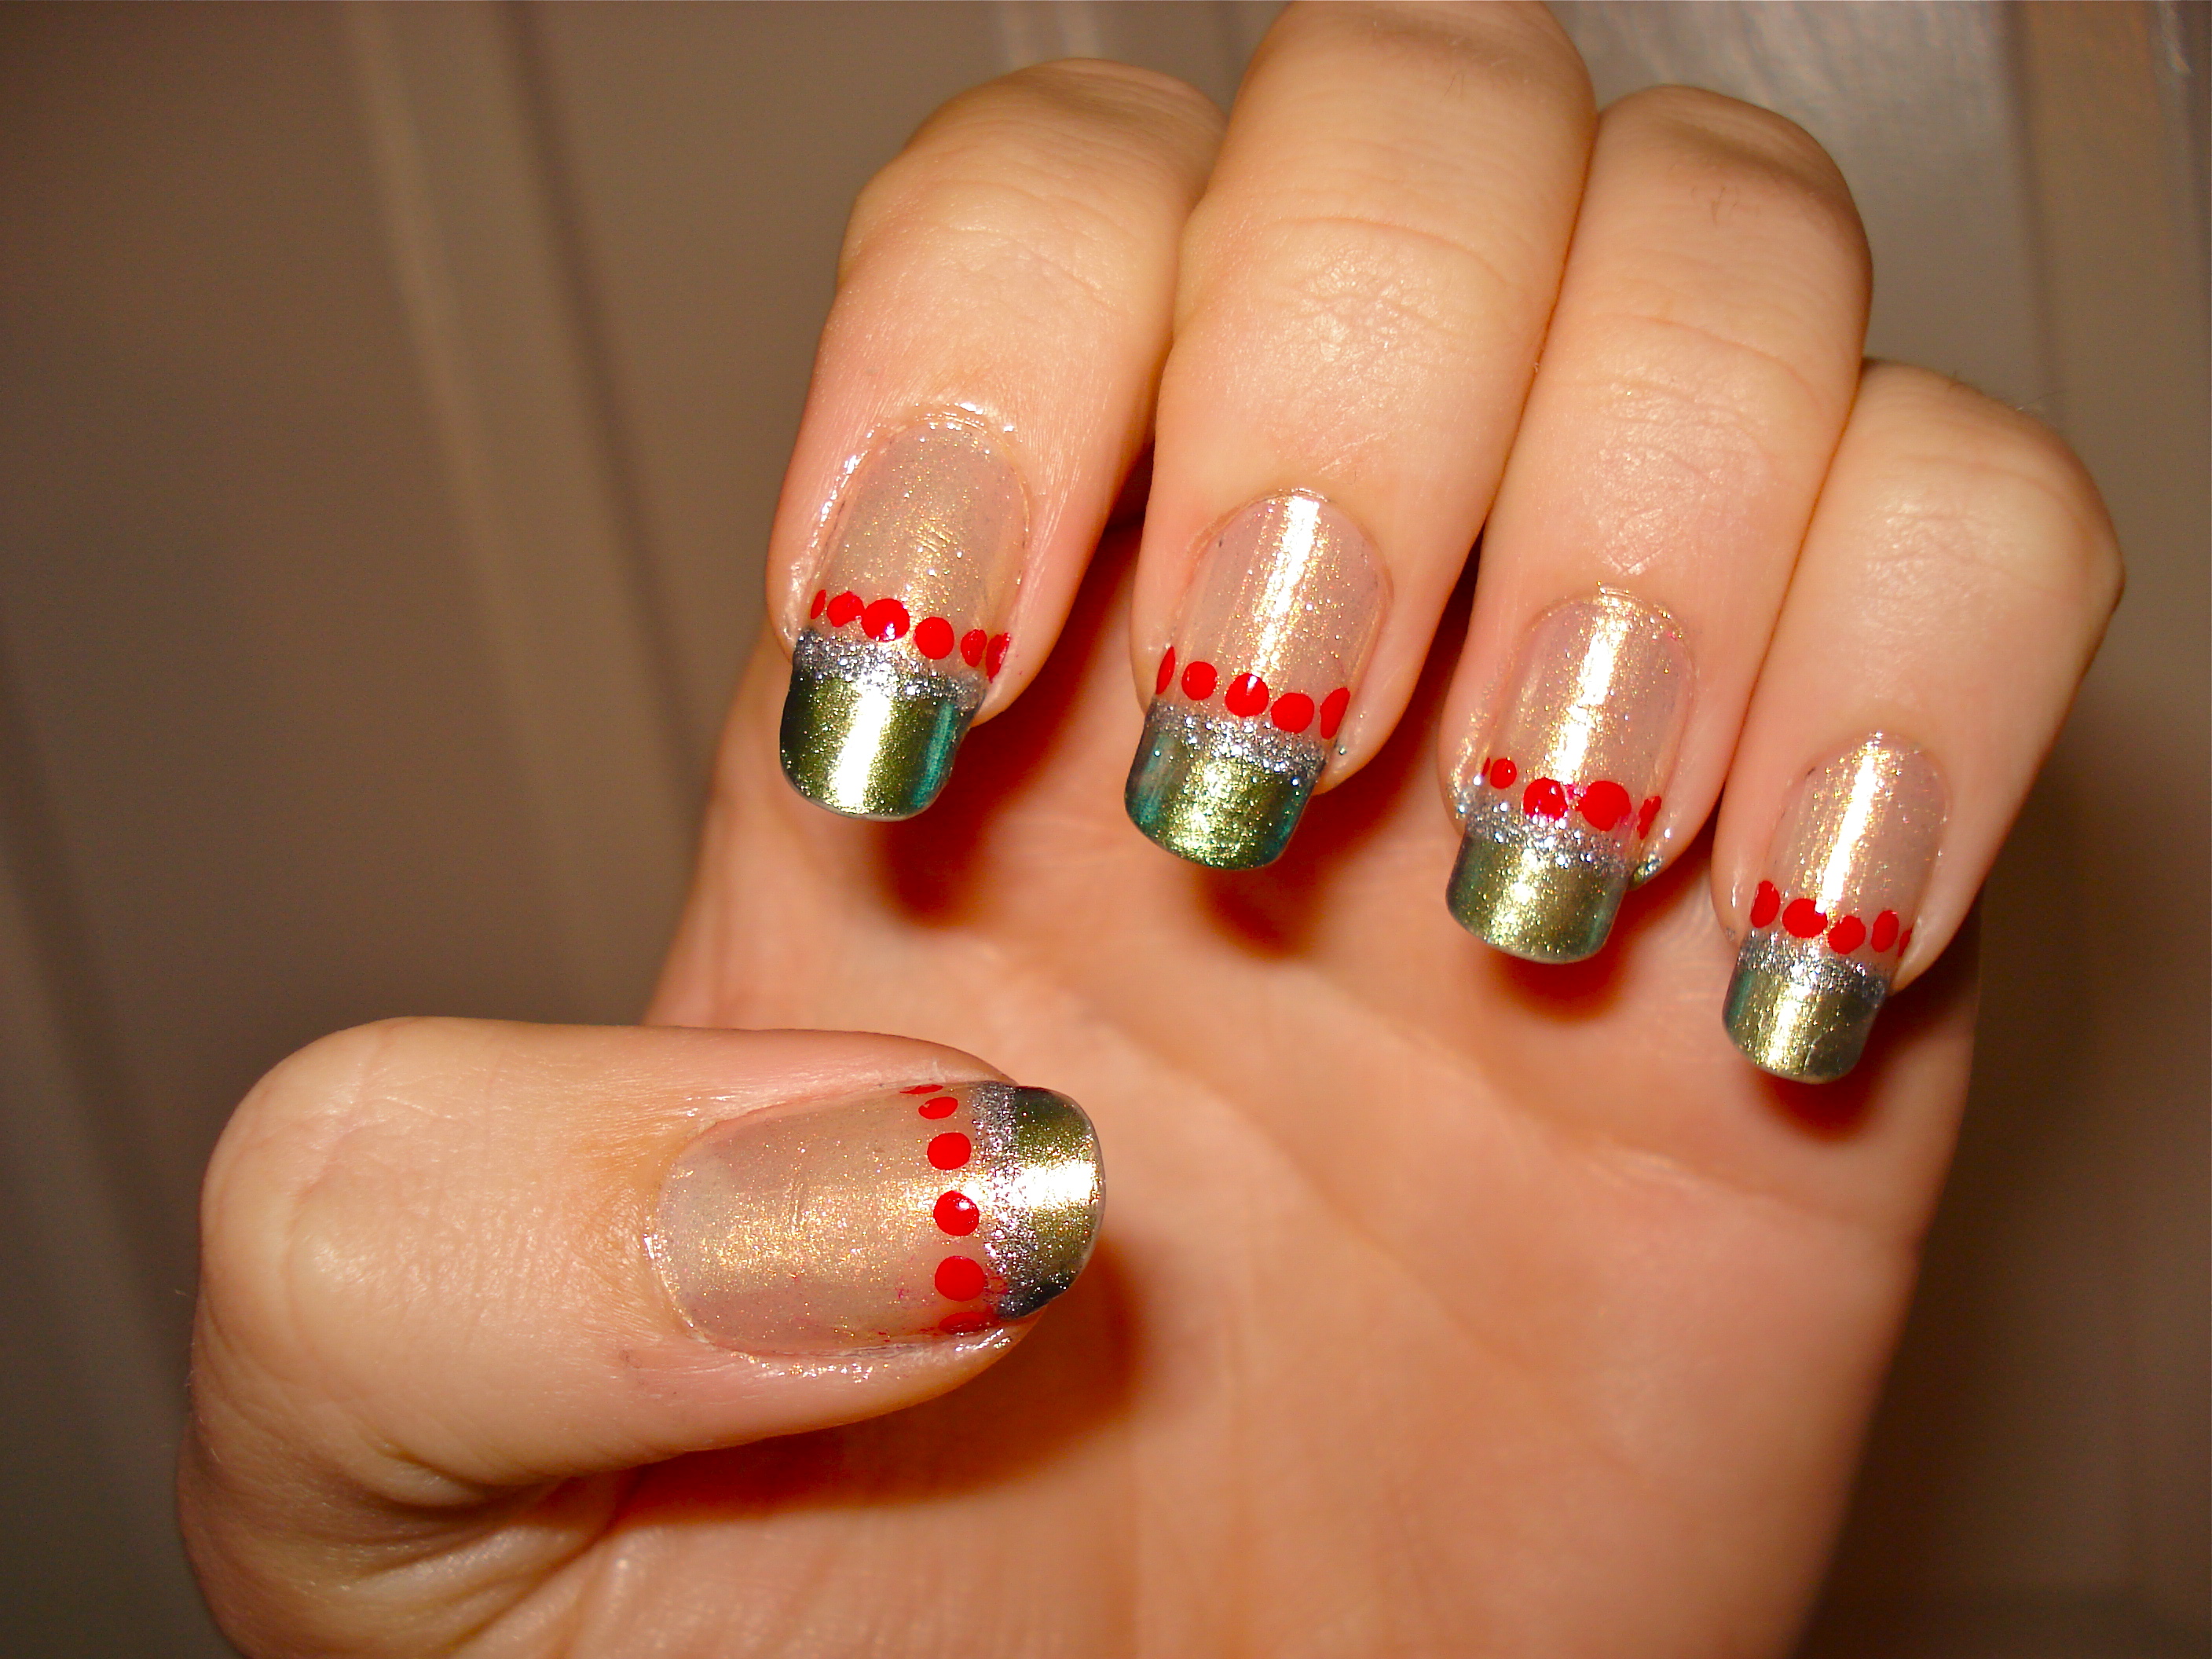 To start off, here is my current nail creation, Christmas nails!